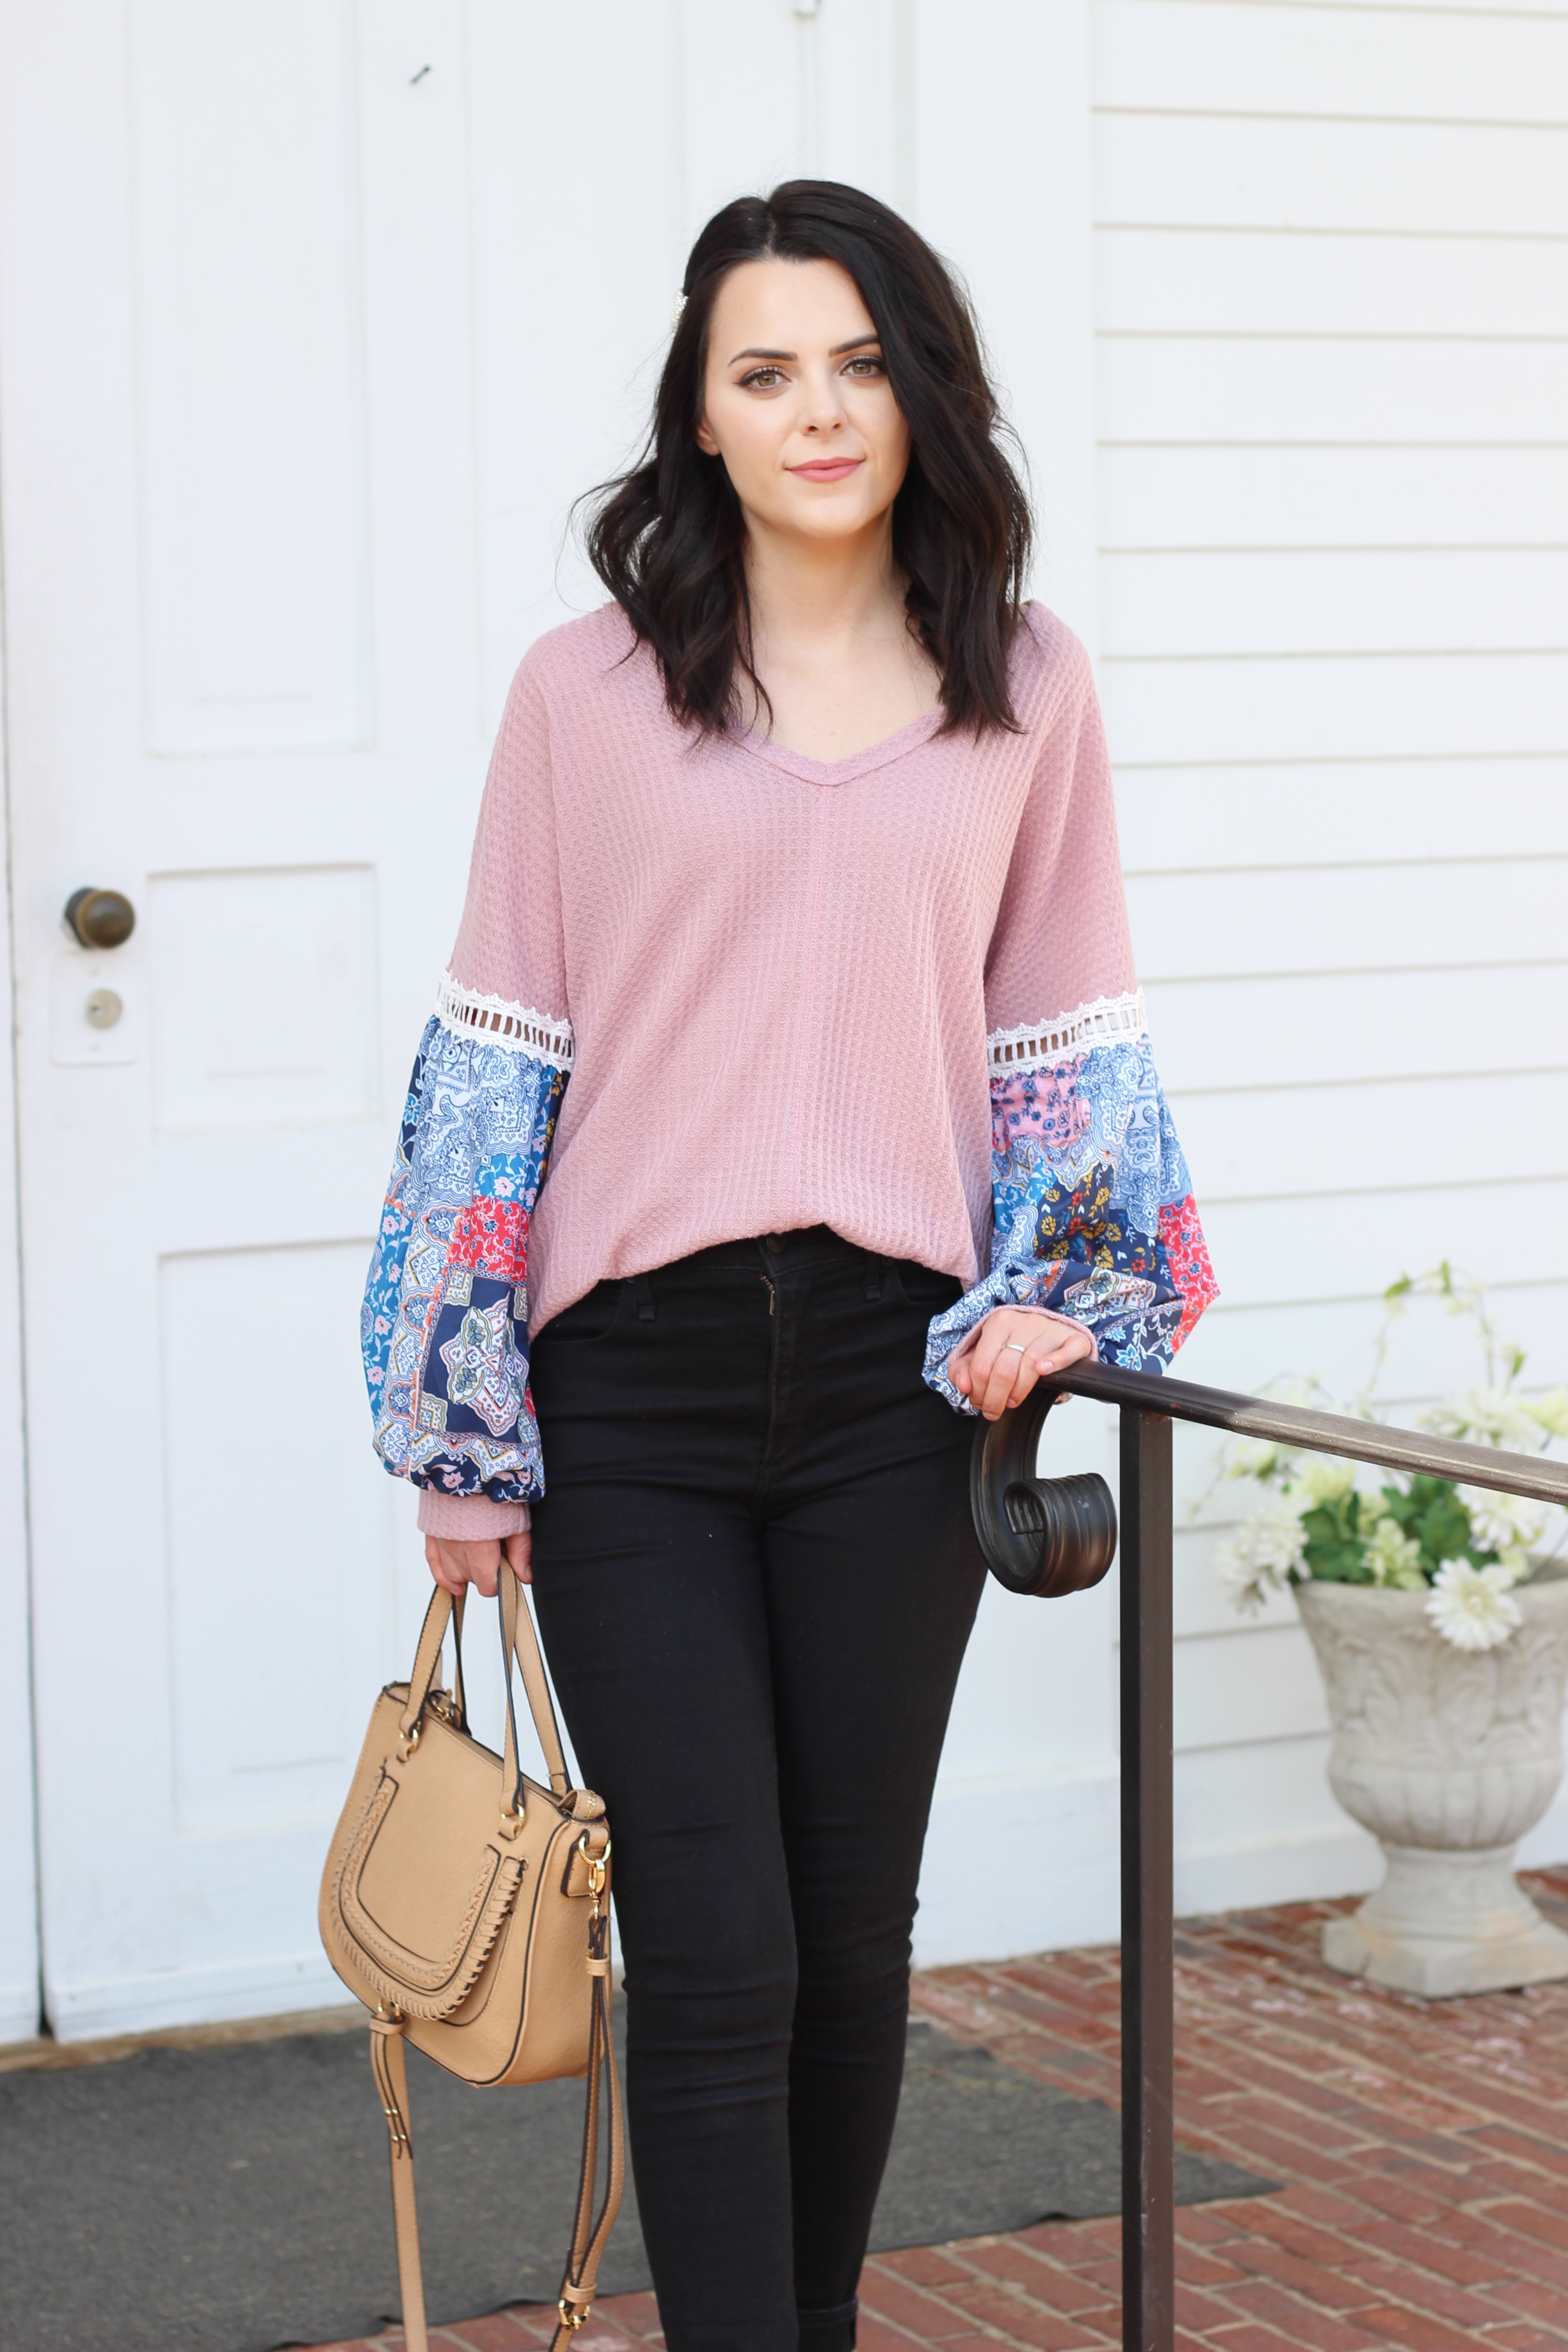 Free People Inspired Sweater!